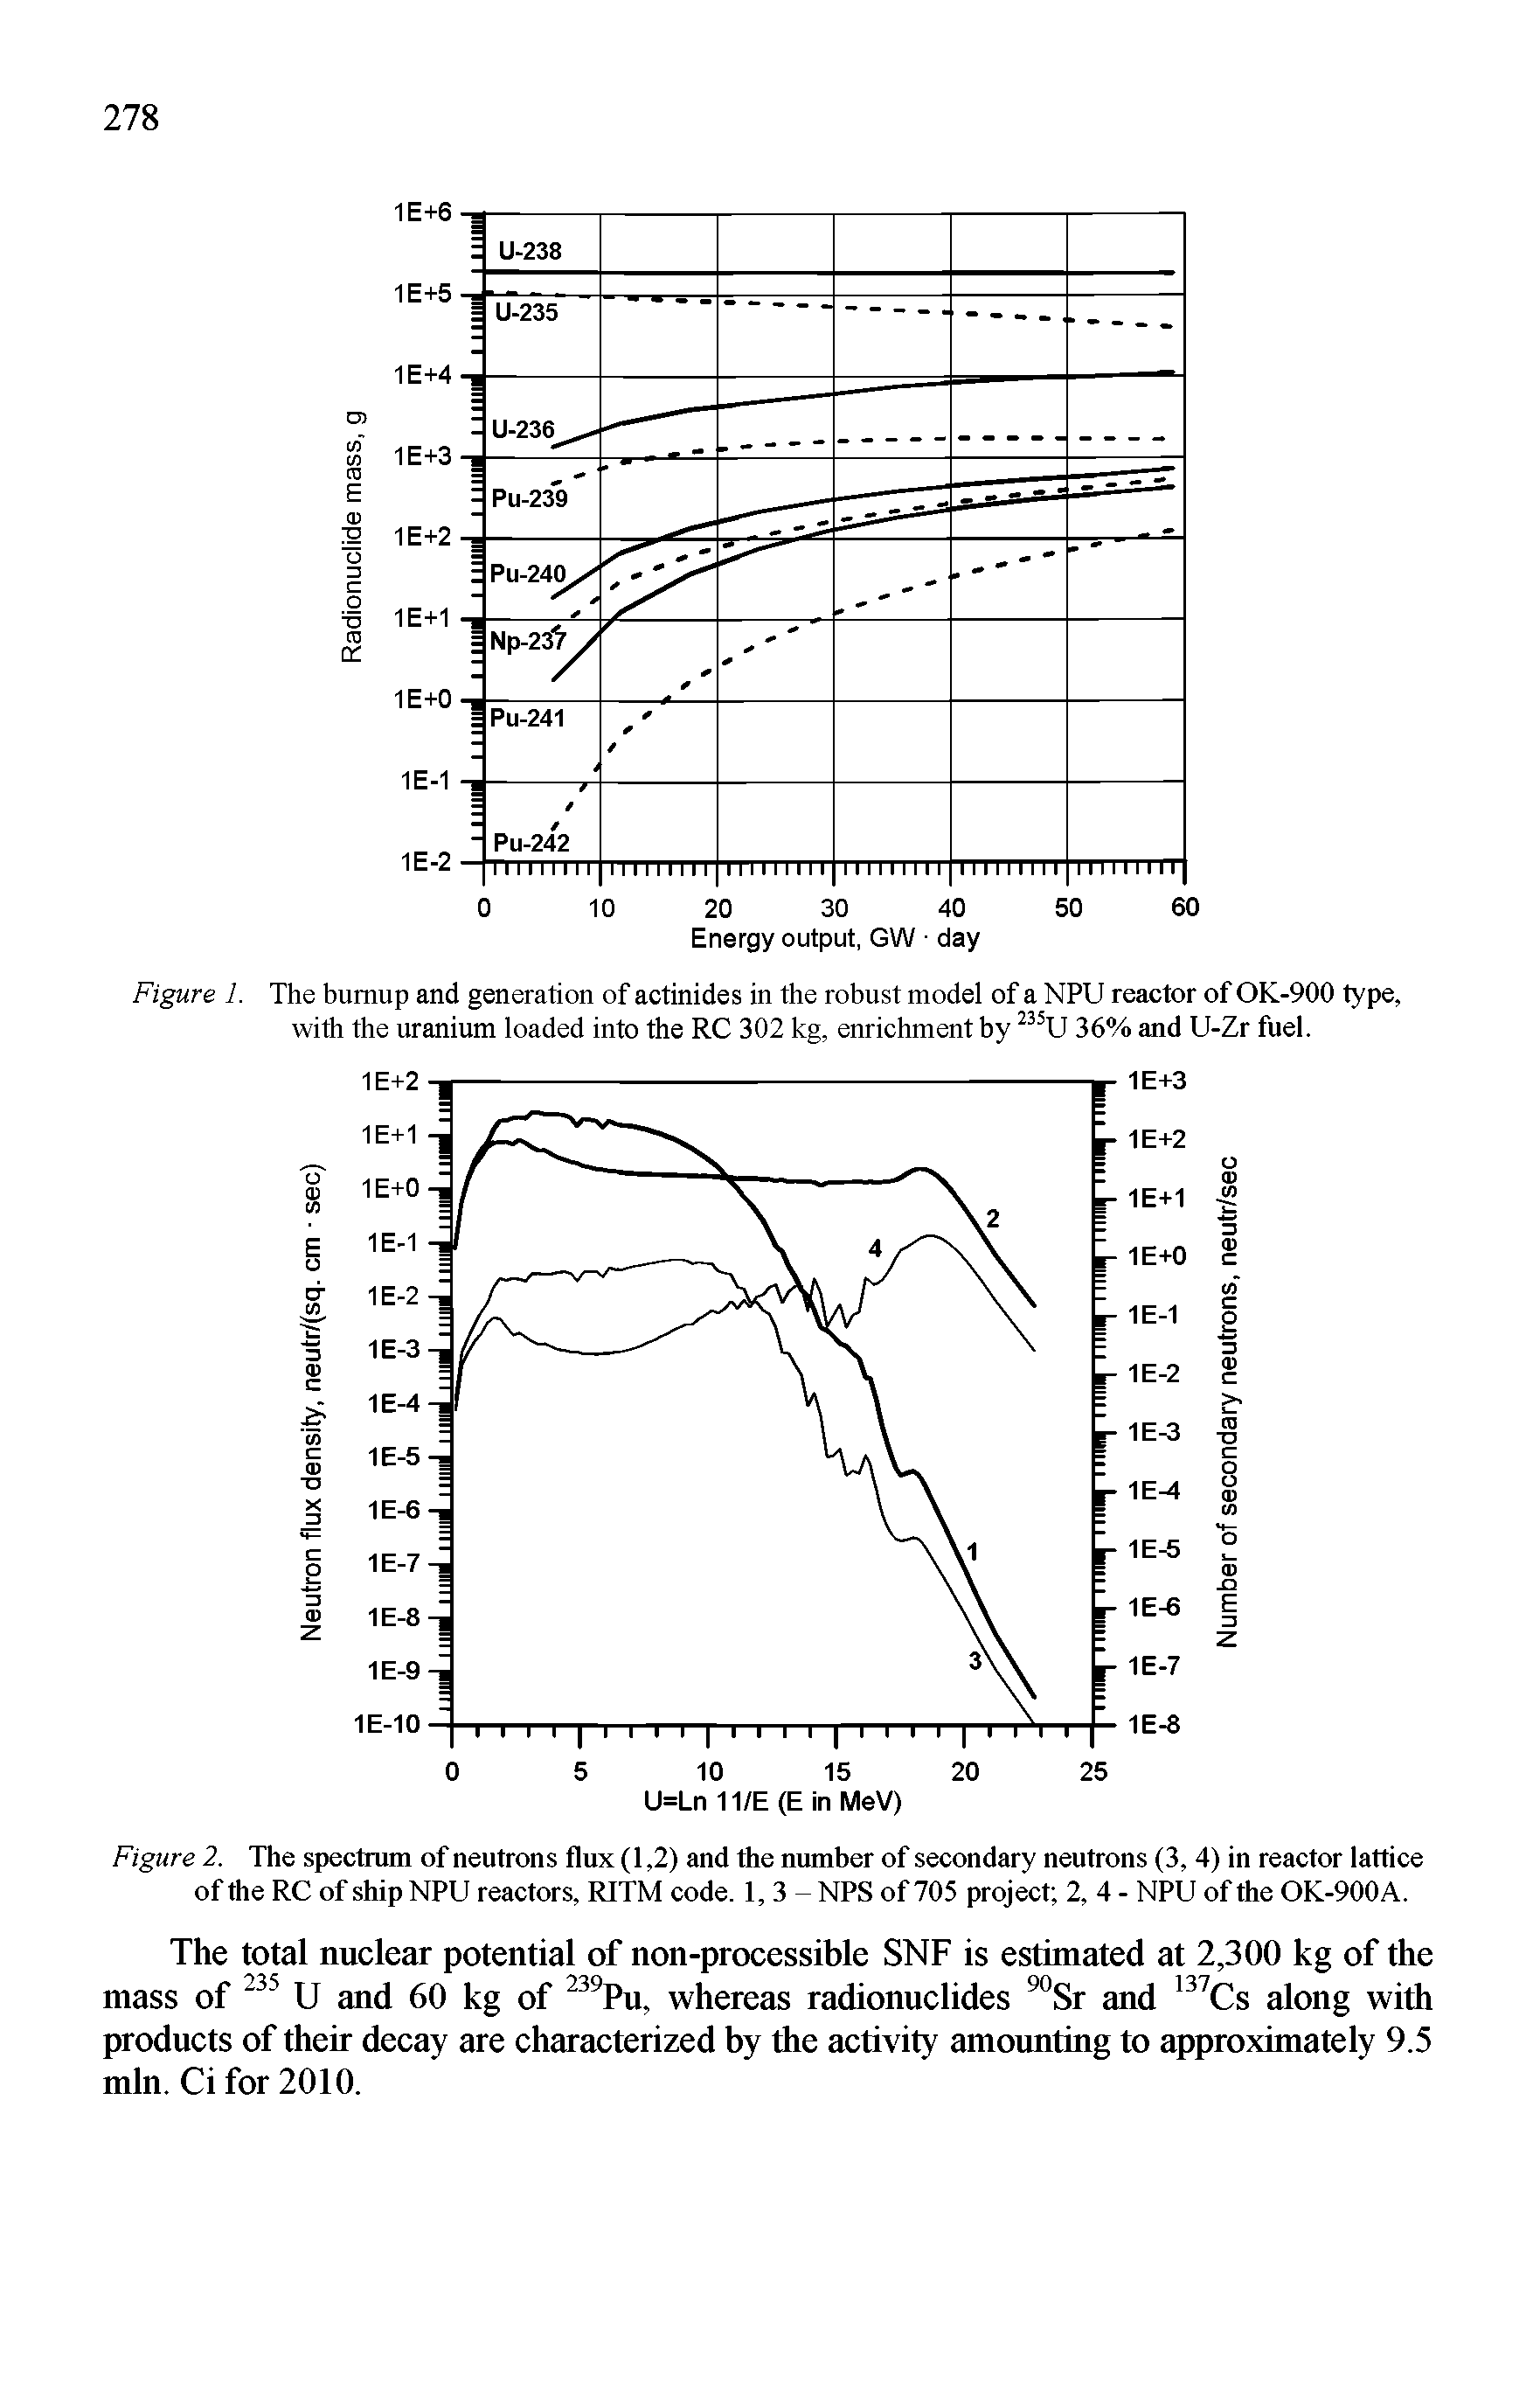 Figure 1. The bumup and generation of actinides in the robust model of a NPU reactor of OK-900 type, with the uranium loaded into the RC 302 kg, enrichment by 36% and U-Zr fuel.